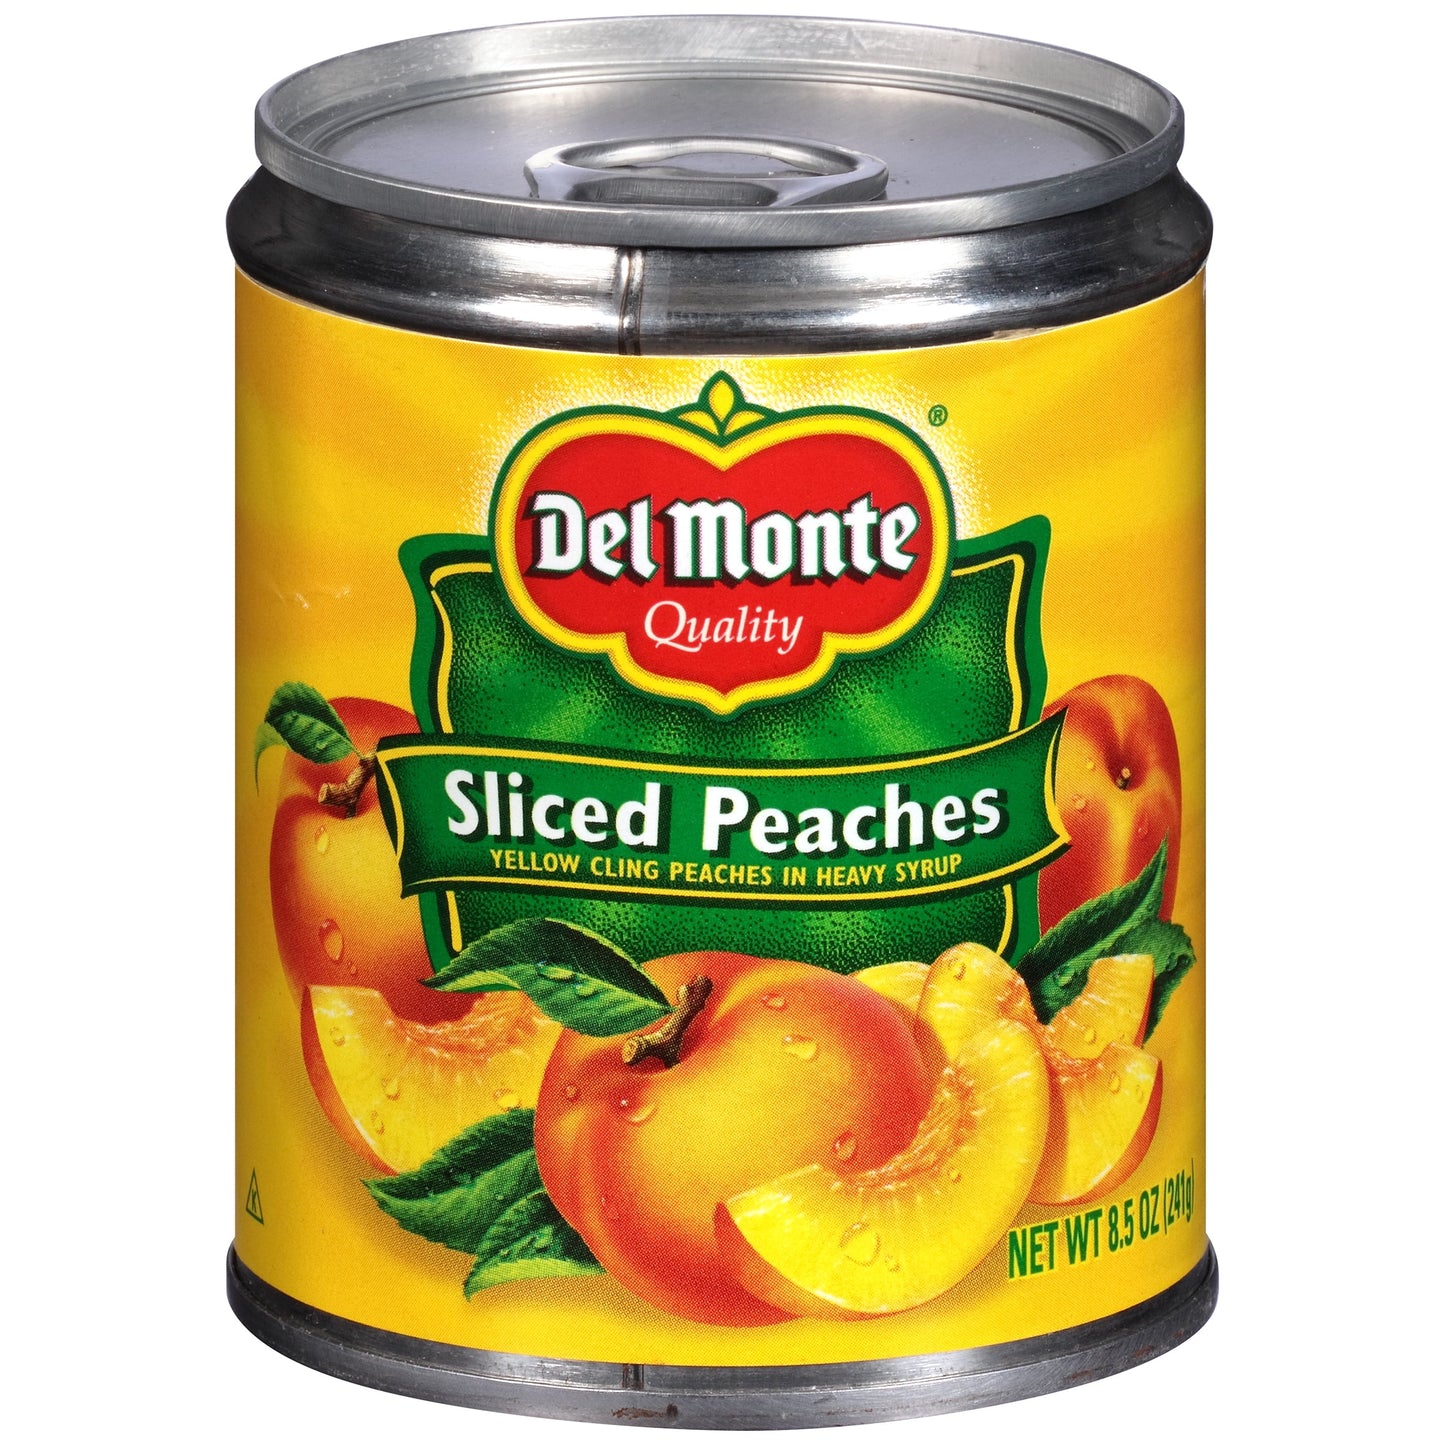 Sliced Peaches, Heavy Syrup, Canned Fruit, 8.5 Oz Can